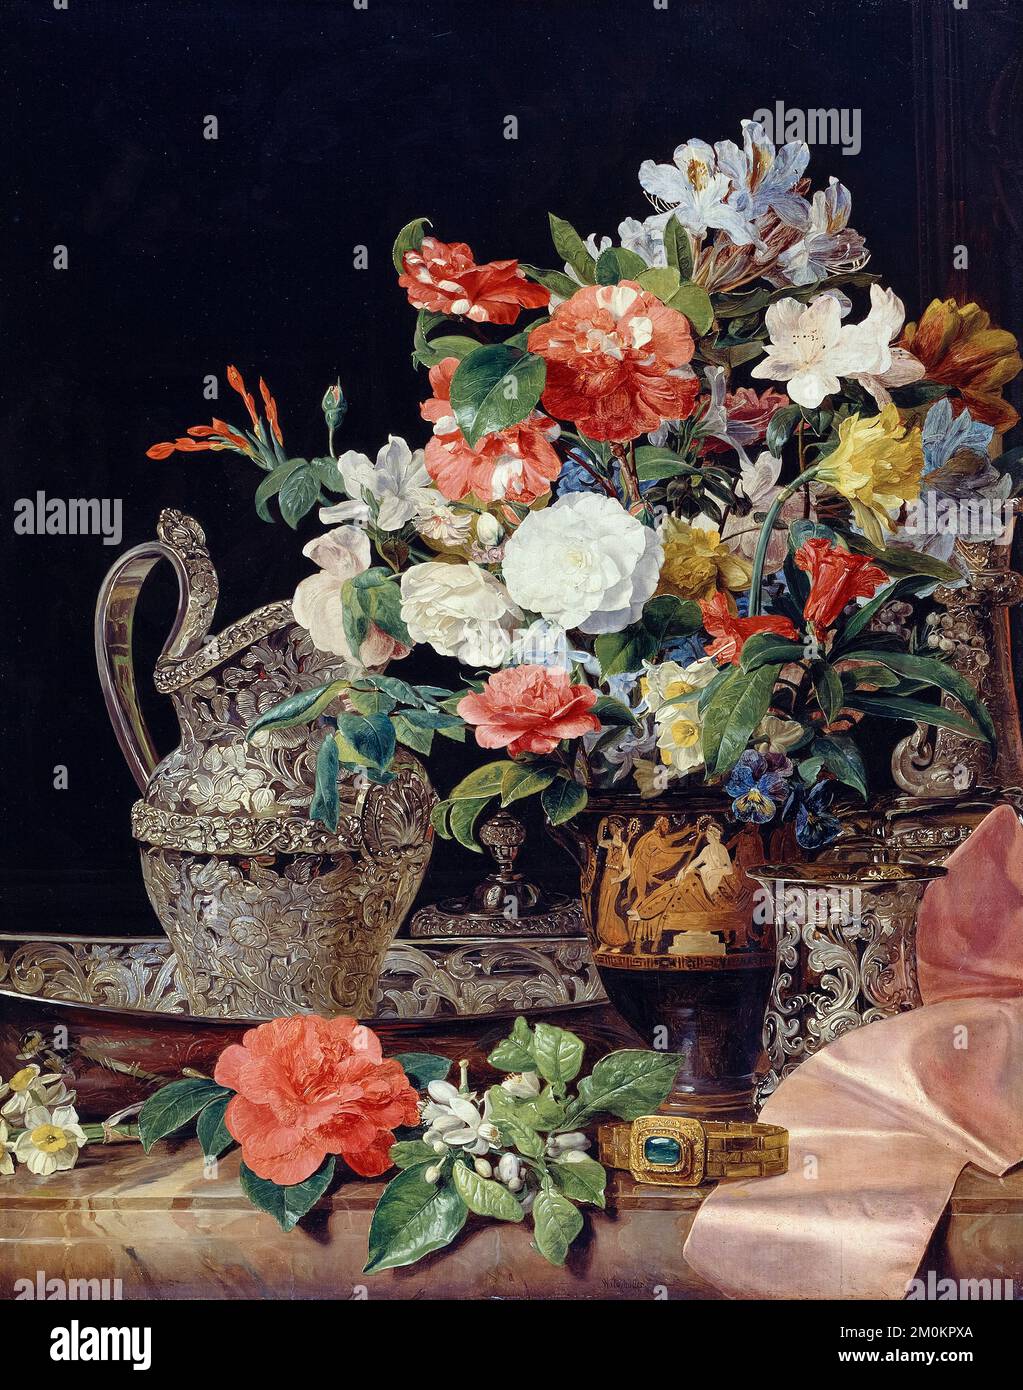 Ferdinand Georg Waldmüller, Bouquet with silver vessels and antique vase, still life painting in oil on wood, circa 1840 Stock Photo